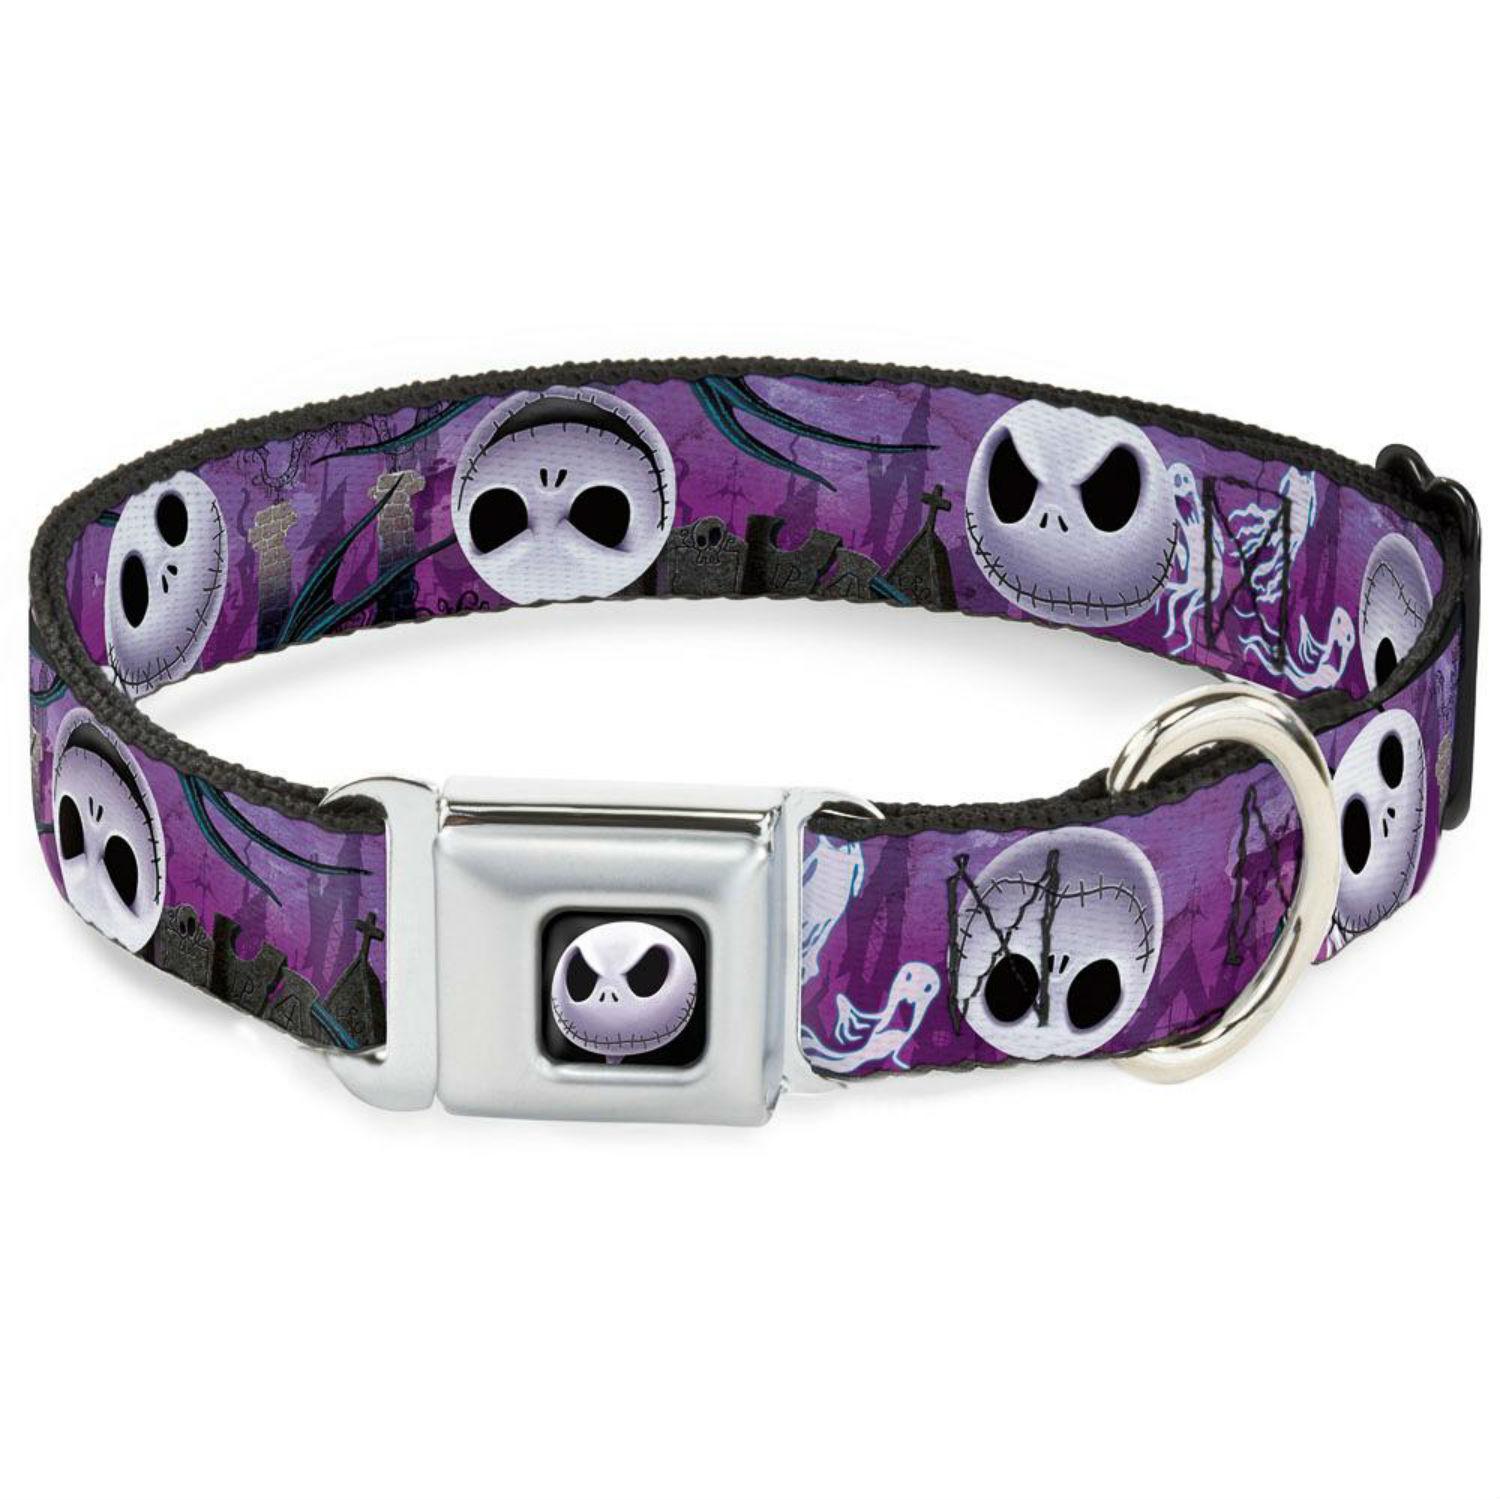 Nightmare Before Christmas Seatbelt Buckle Dog Collar by Buckle-Down - Purple